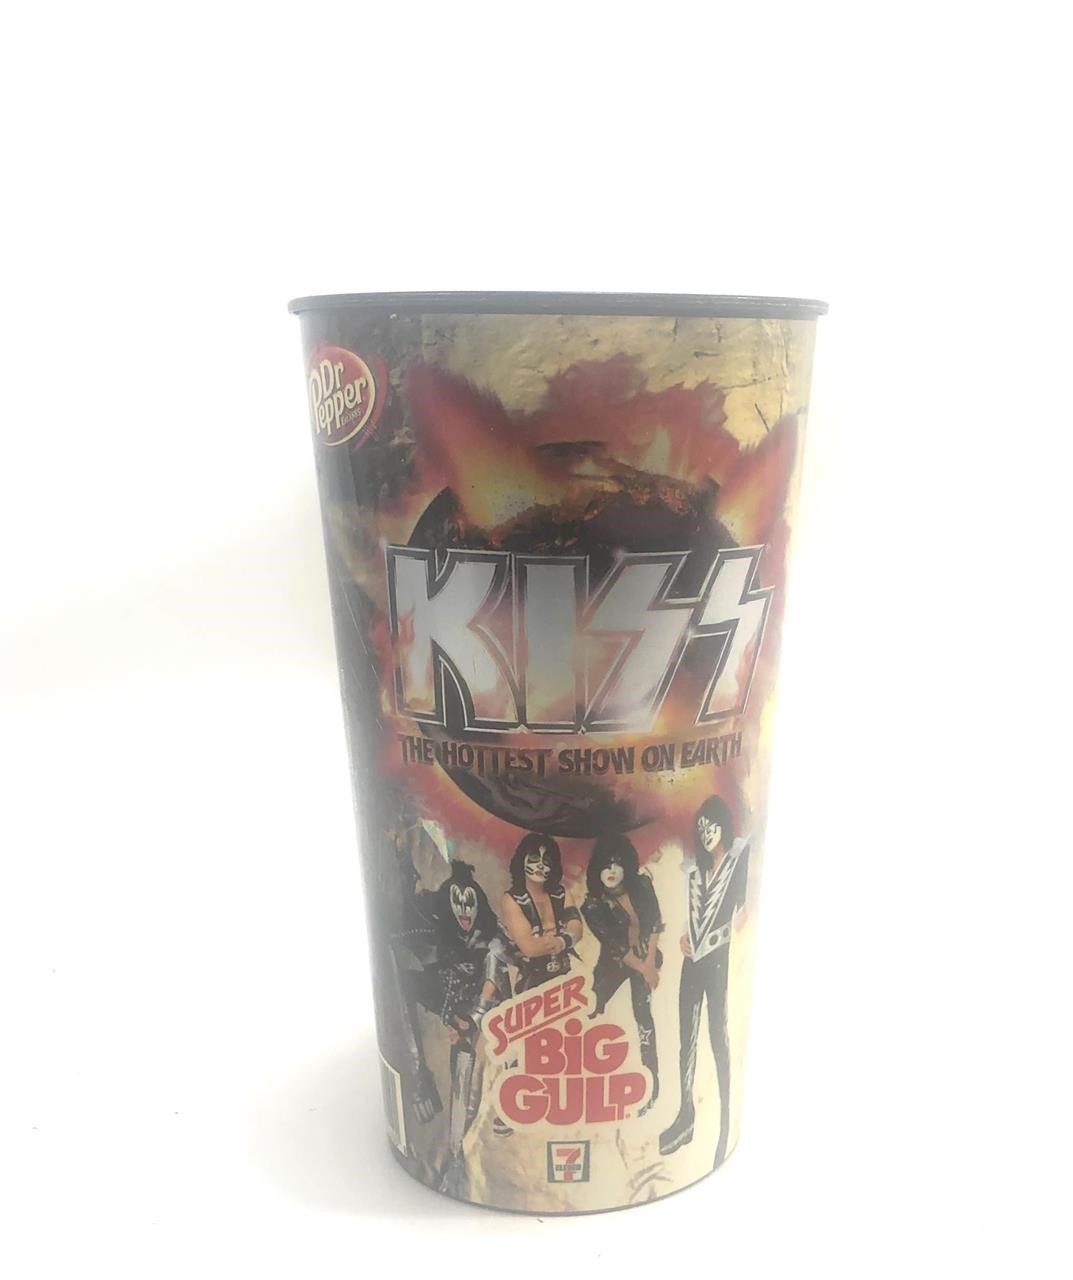 Kiss 7-11 Big Gulp Cup - Paul "Starchild" Stanely